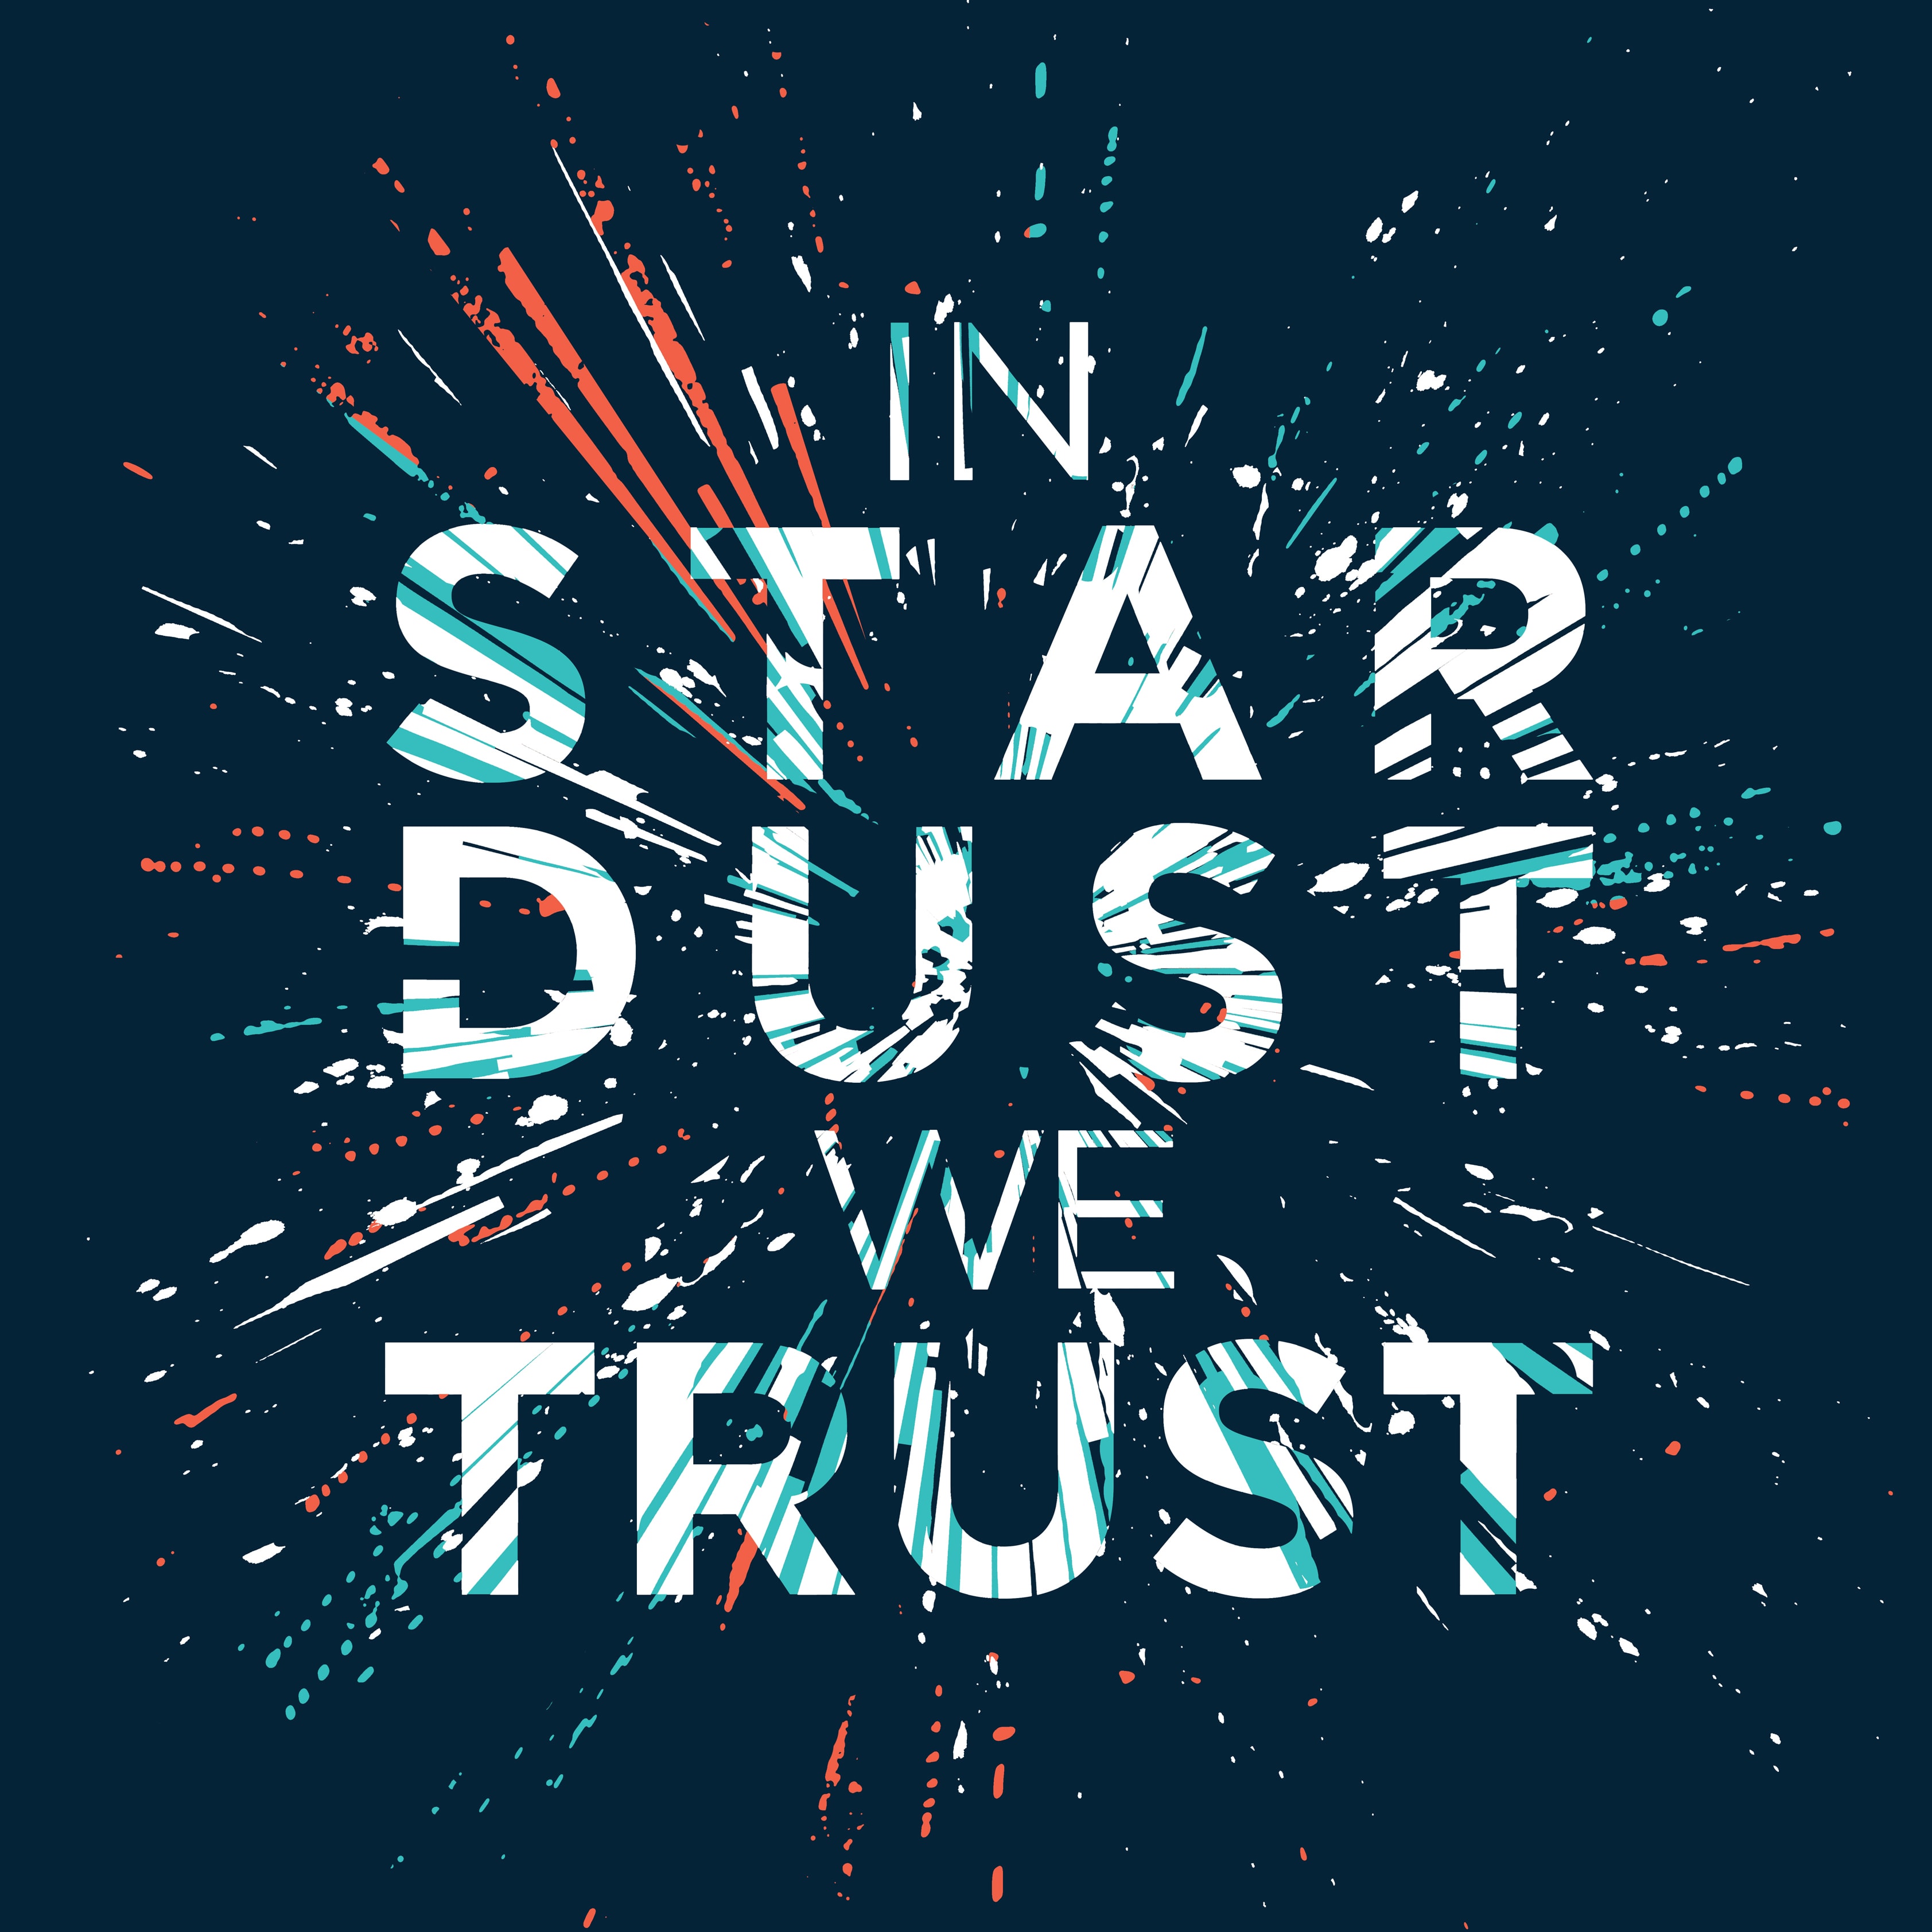 Tes One - In Stardust We Trust